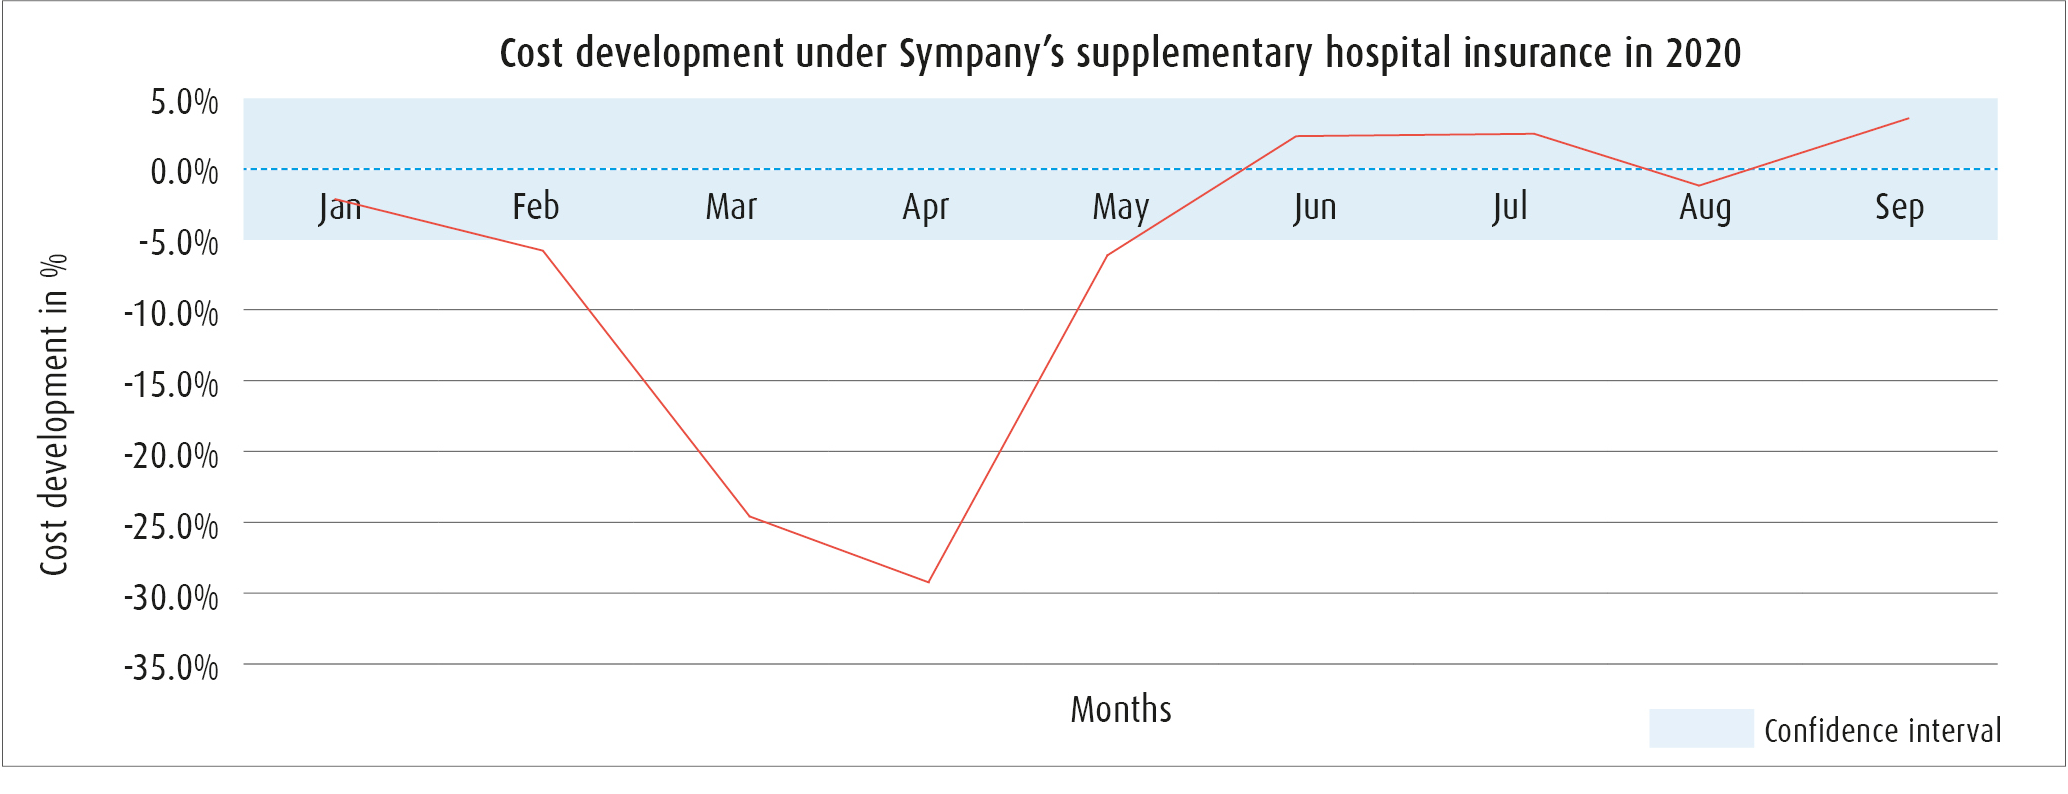 This clearly shows that there was a significant drop in the costs generated under supplementary hospital insurance during the spring 2020 lockdown.